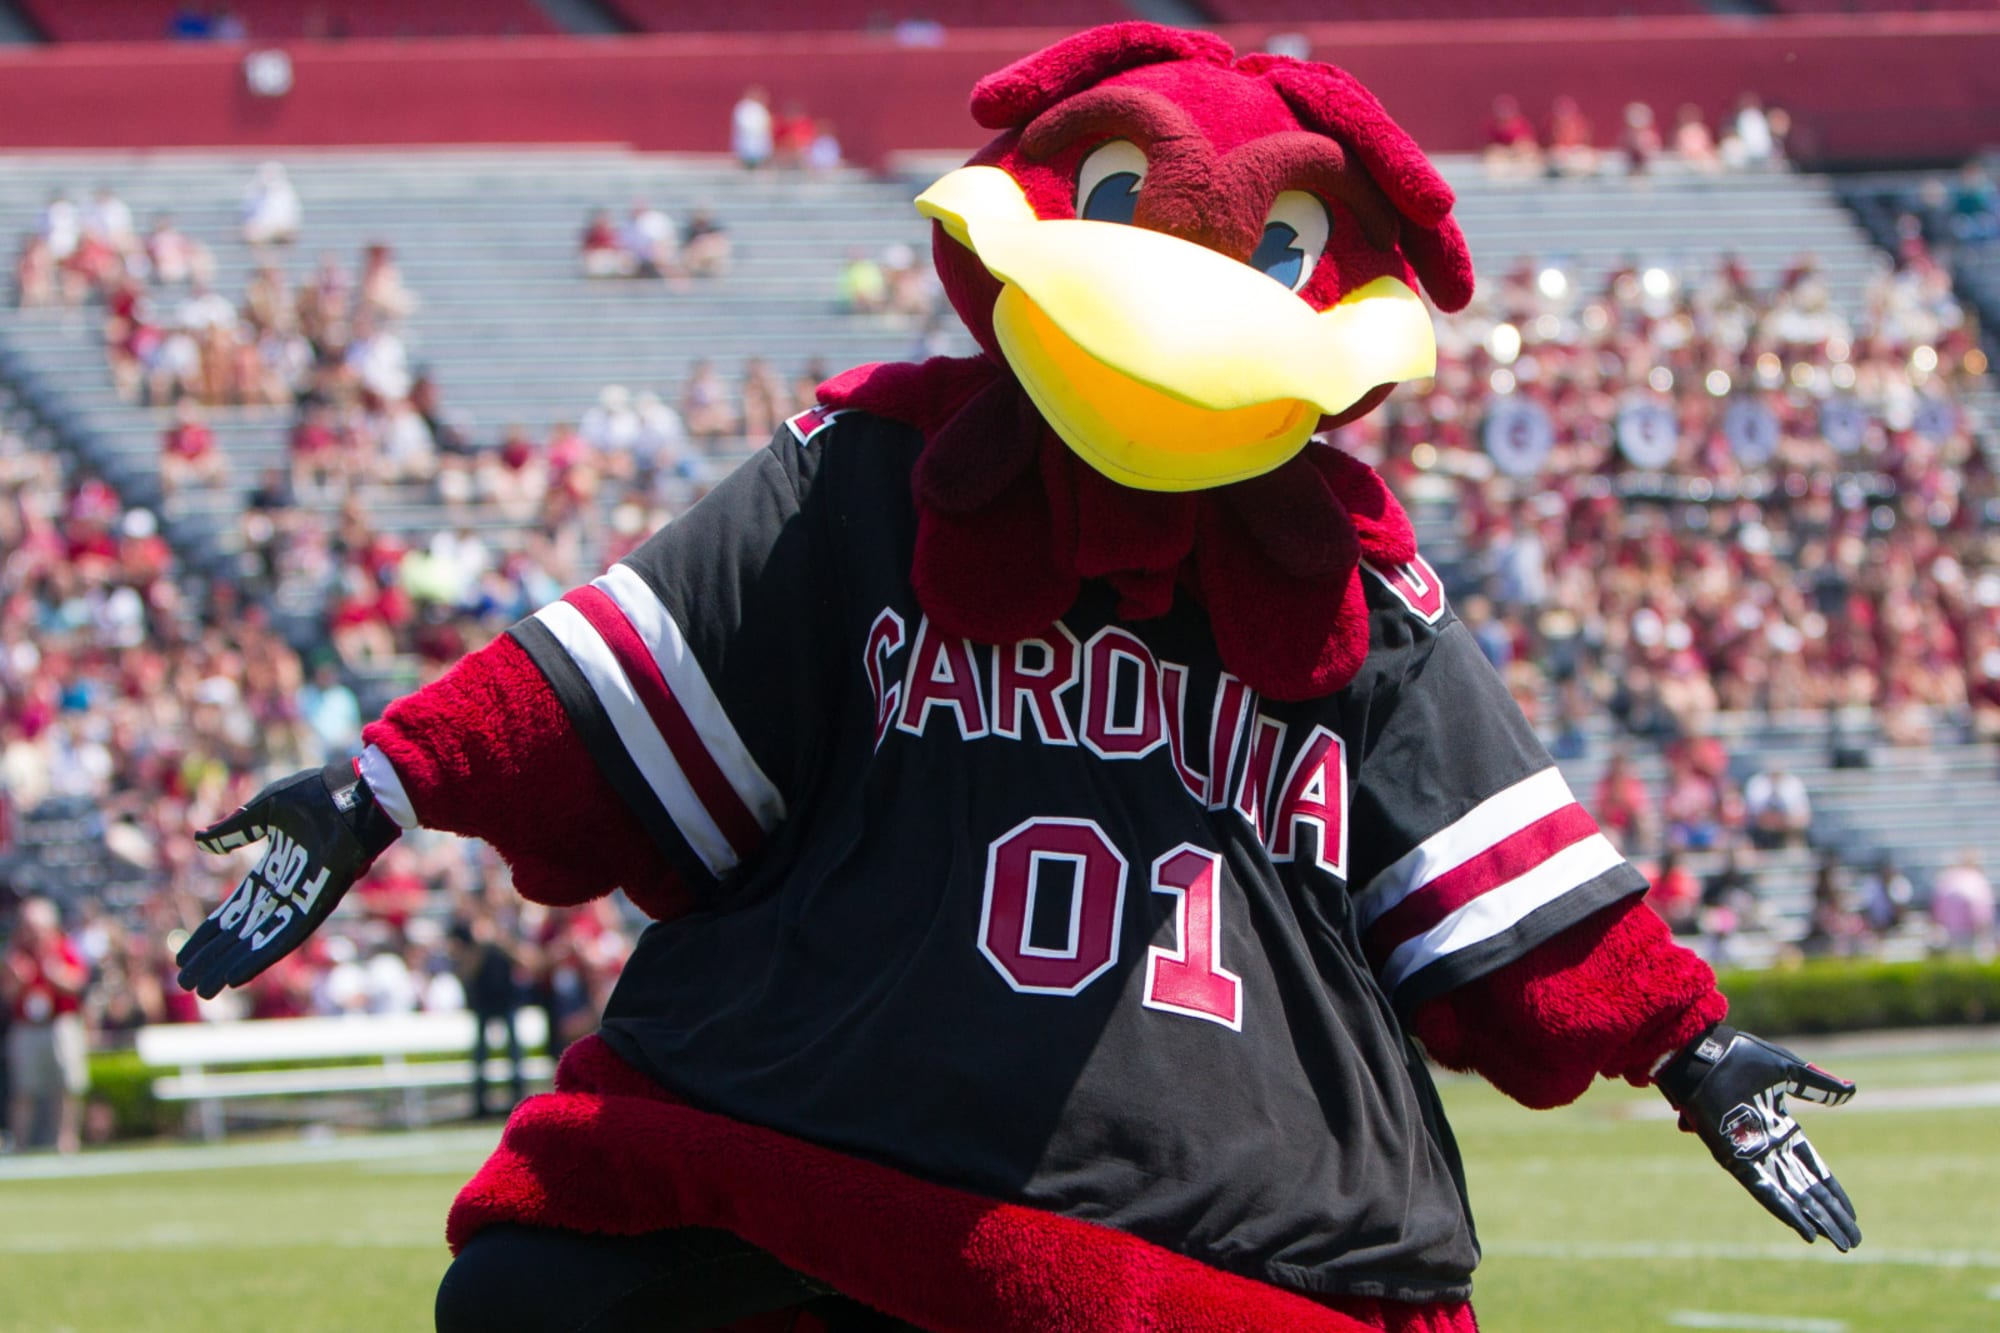 South Carolina Athletics: Gamecocks SECNetwork takeover coming soon